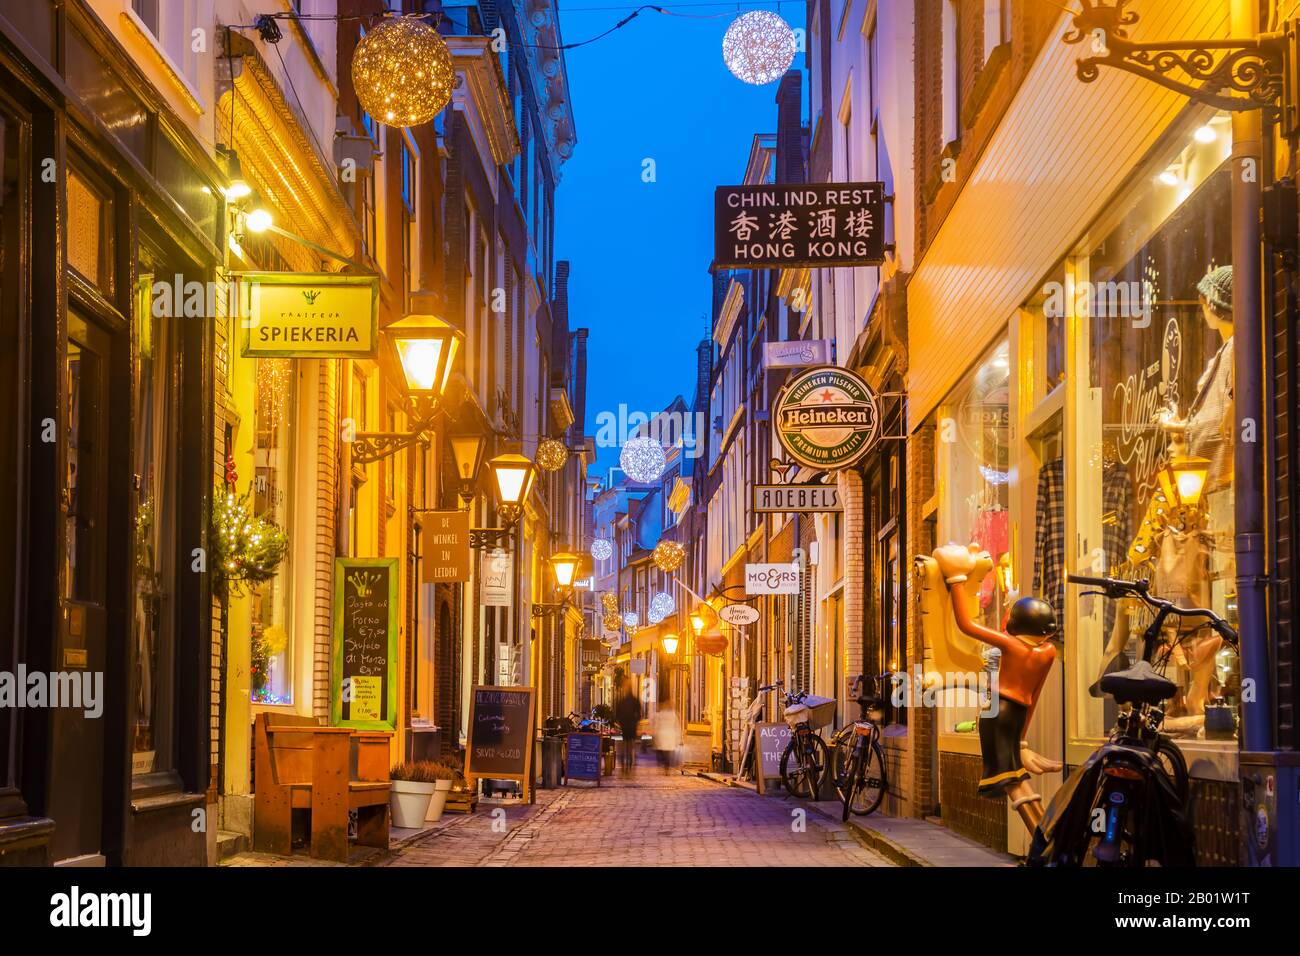 Leiden, The Netherlands - January 16, 2020: Colorful shopping street with christmas decoration in the ancient city center of Leiden, The Netherlands Stock Photo